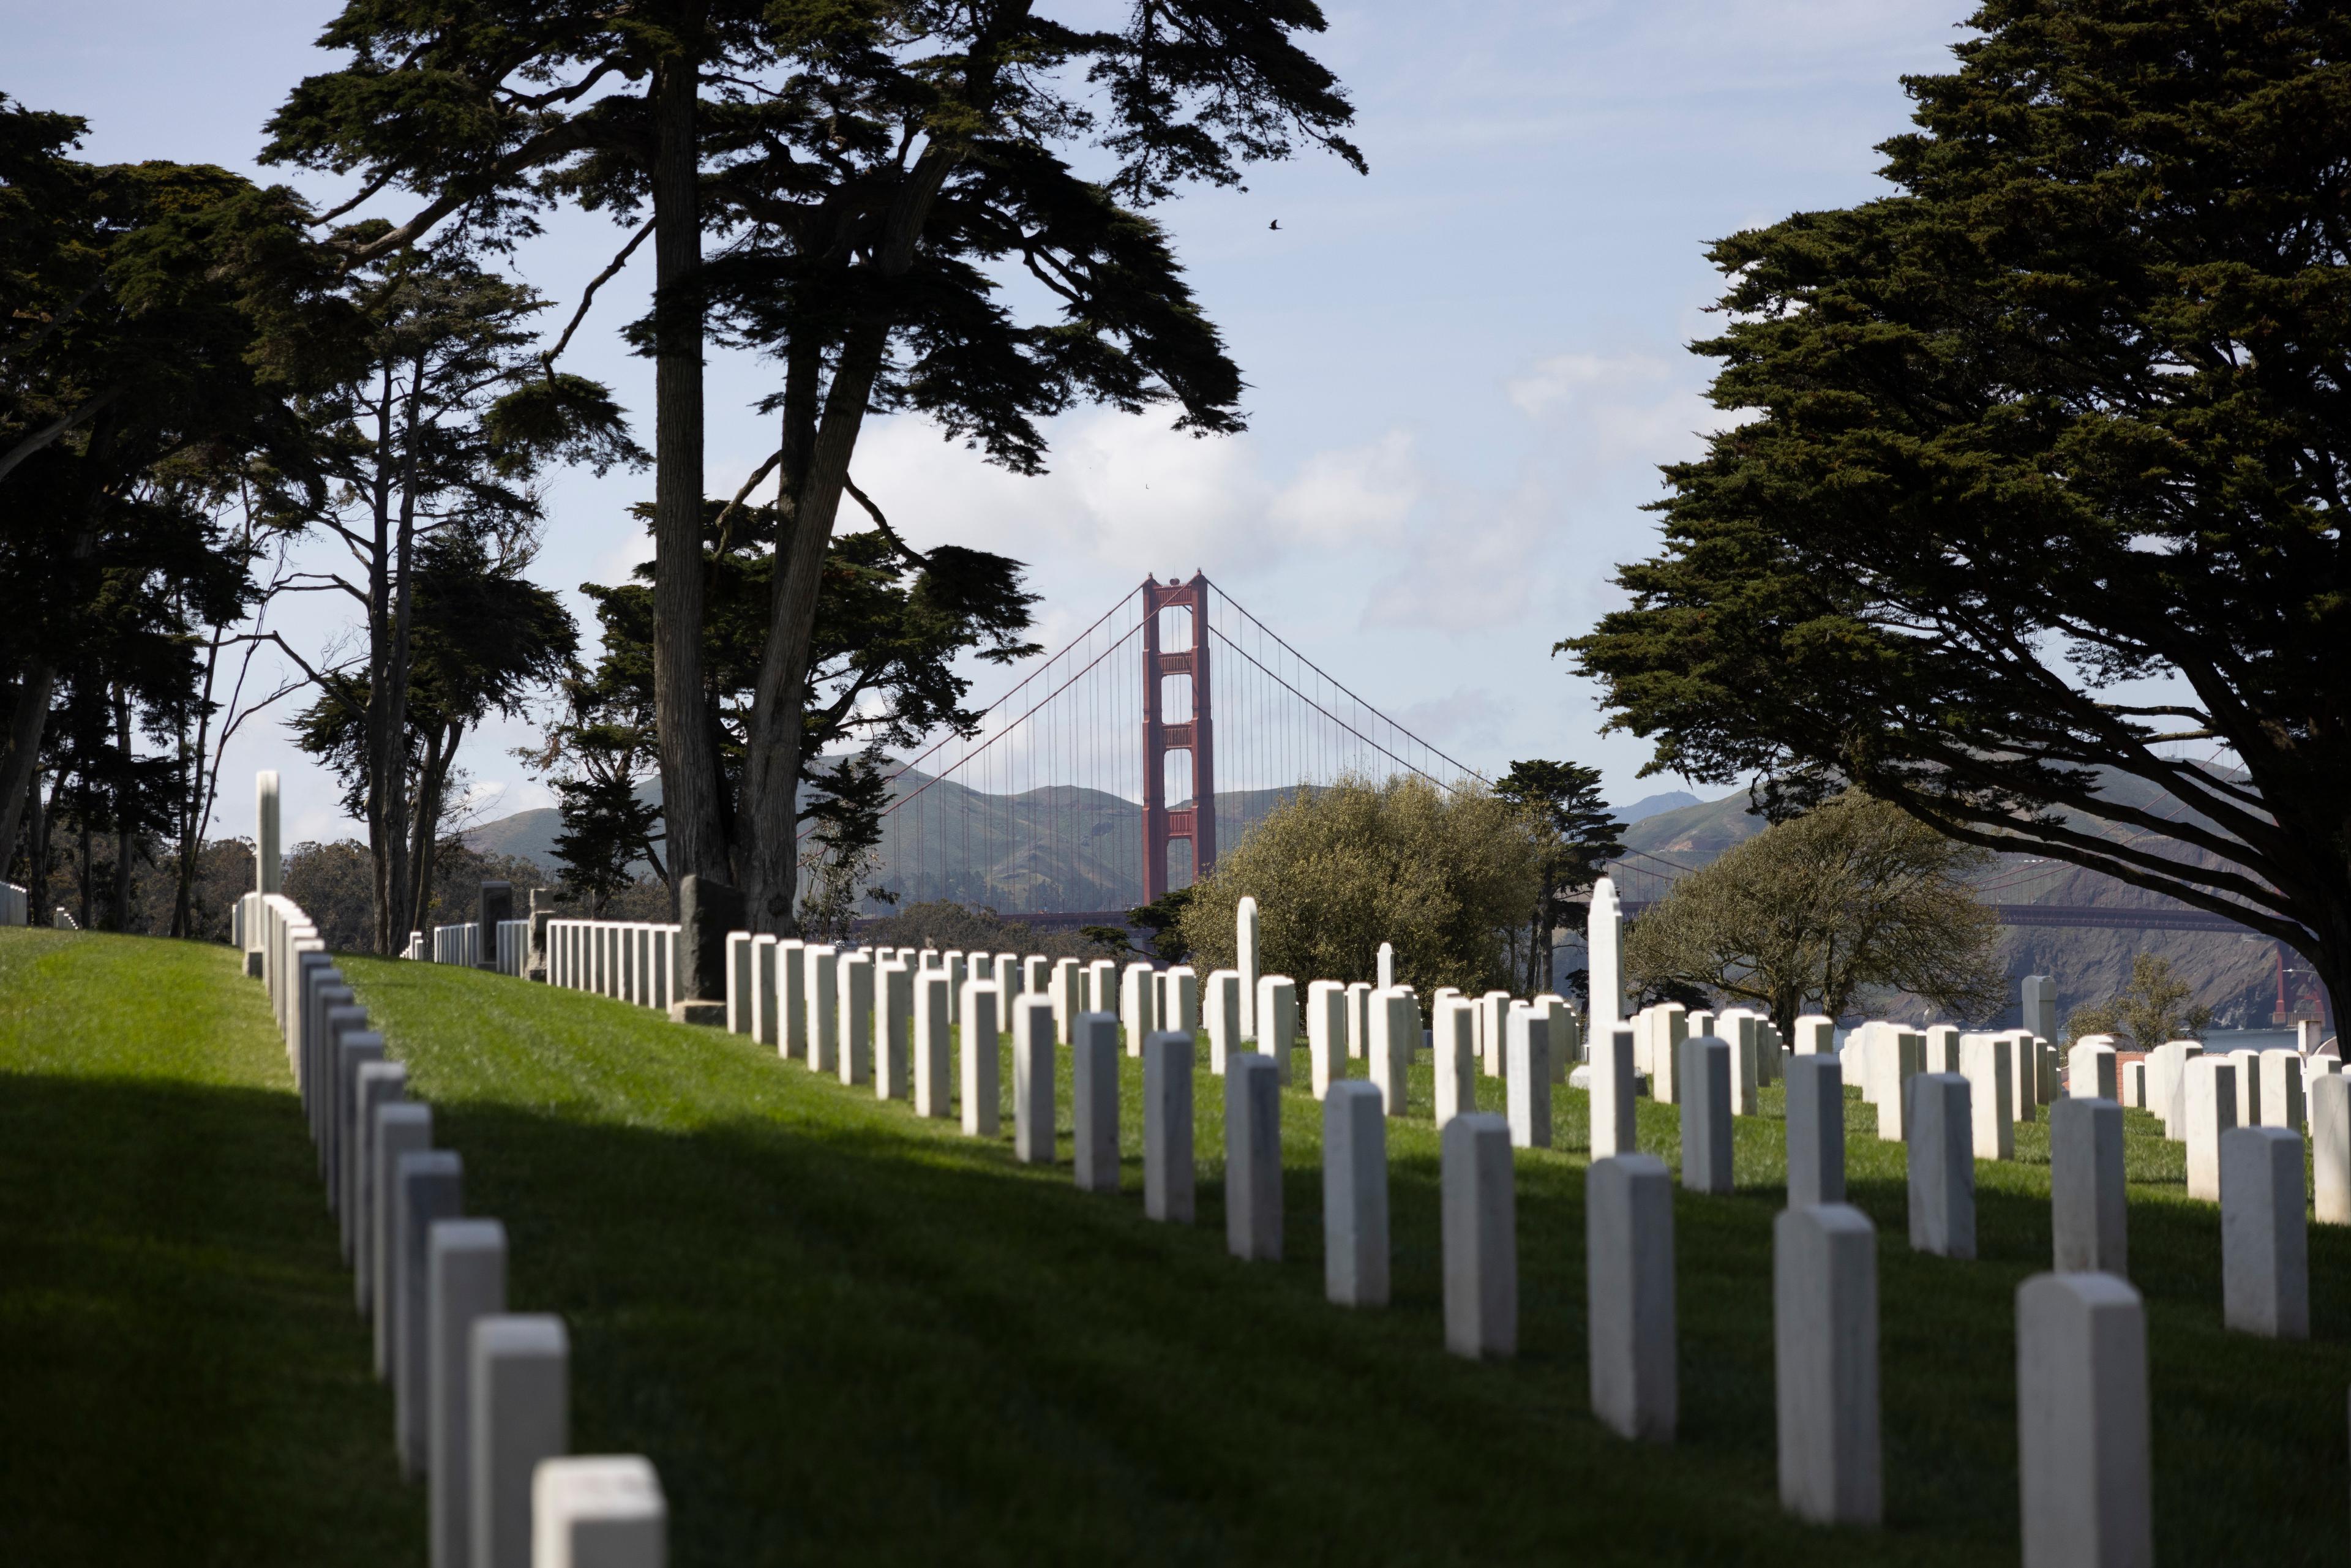 Image of the tombstones on the hill at the San Franciso National Cemetery with the Golden Gate Bridge in the background.